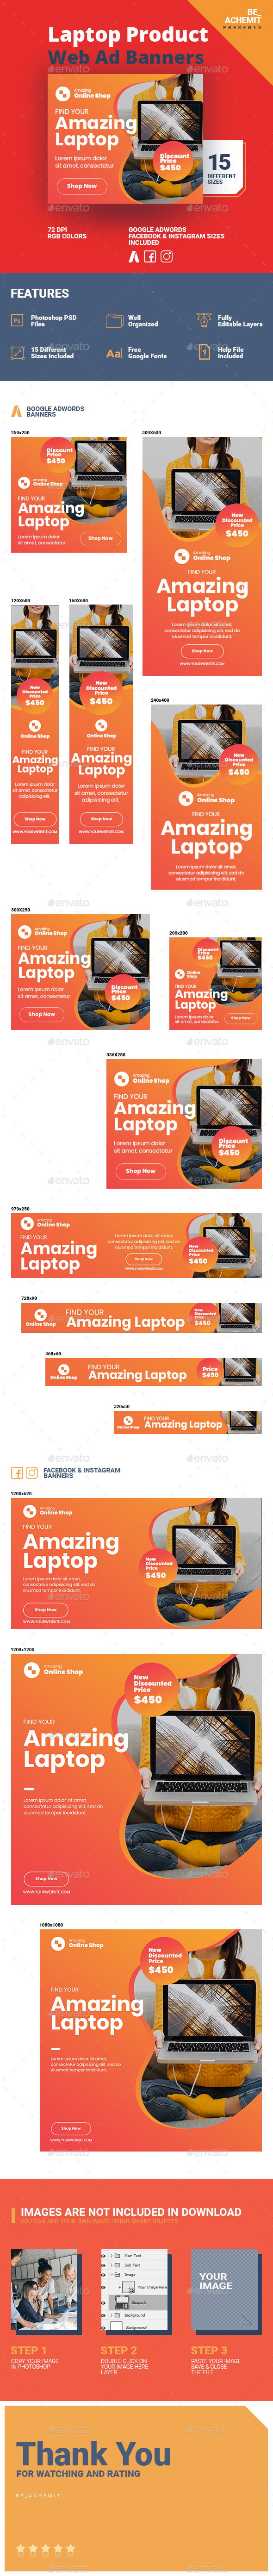 Laptop Product Web Banner Ad